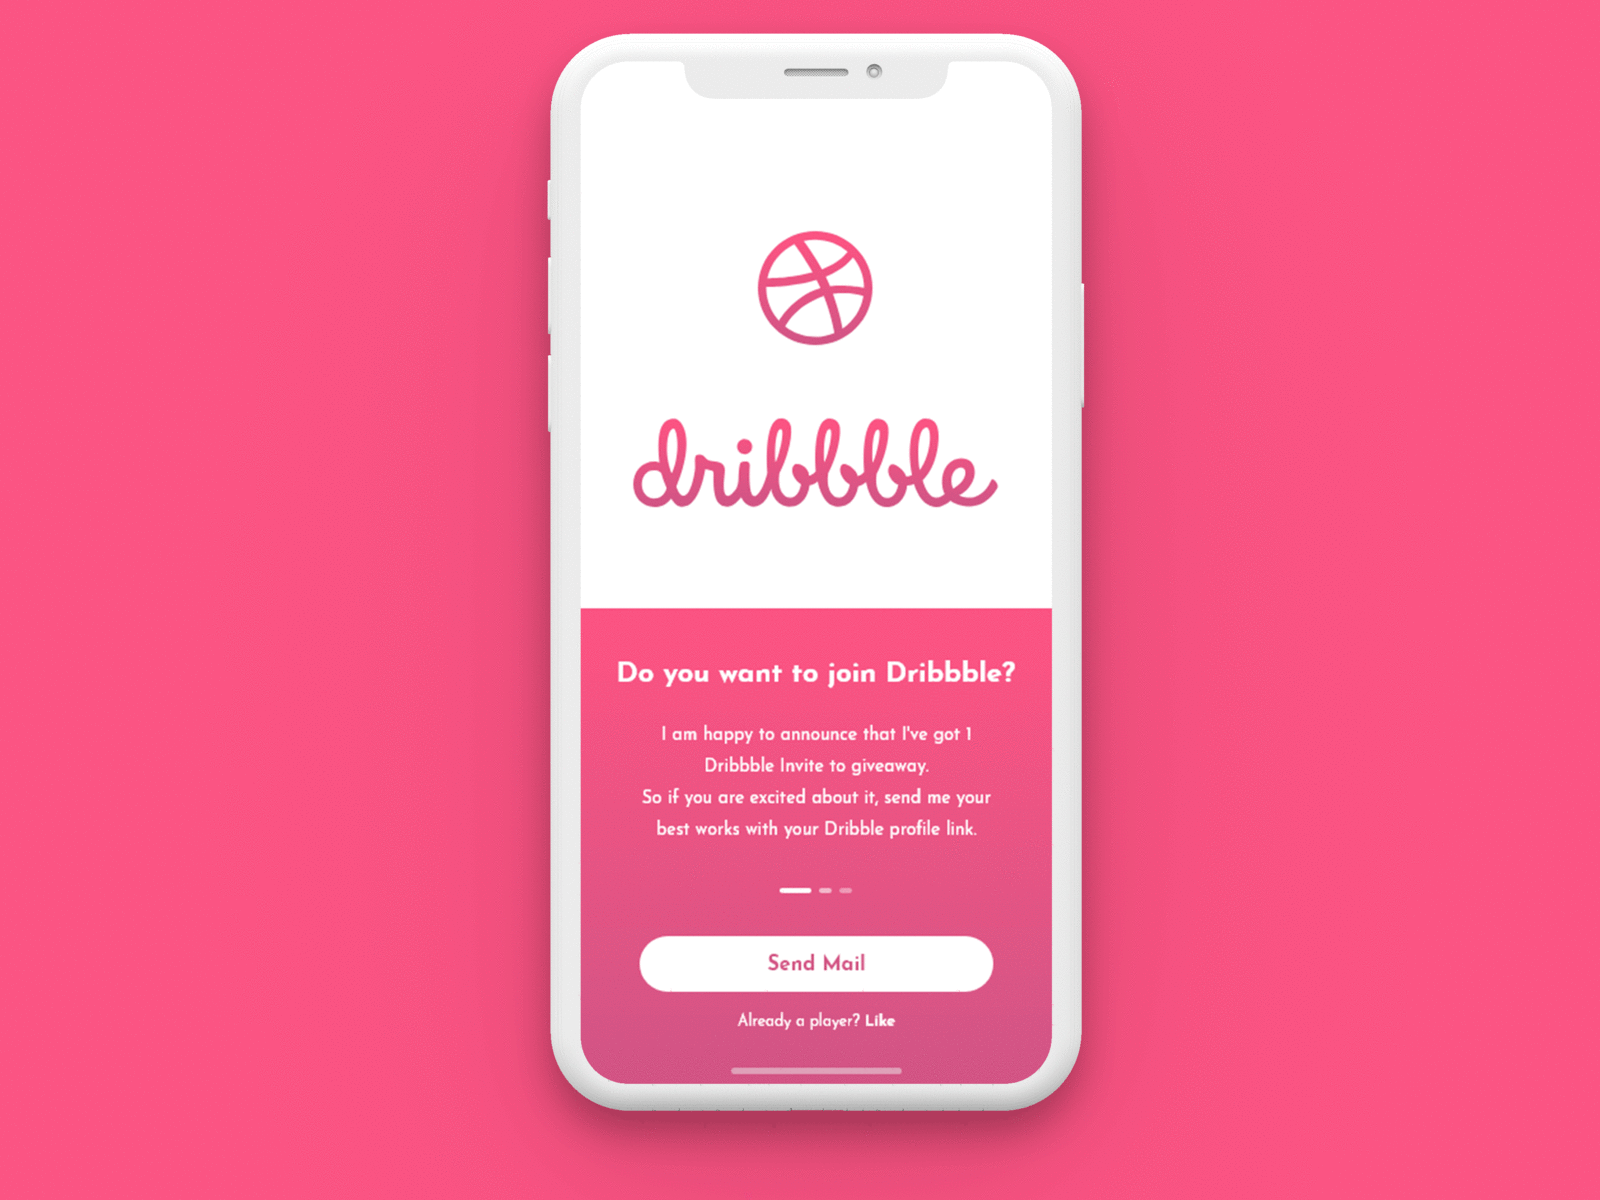 Dribble Invite available for an awesome designer brand dribbble dribbble best shot dribble invite invite invite design invite giveaway new account uidesign